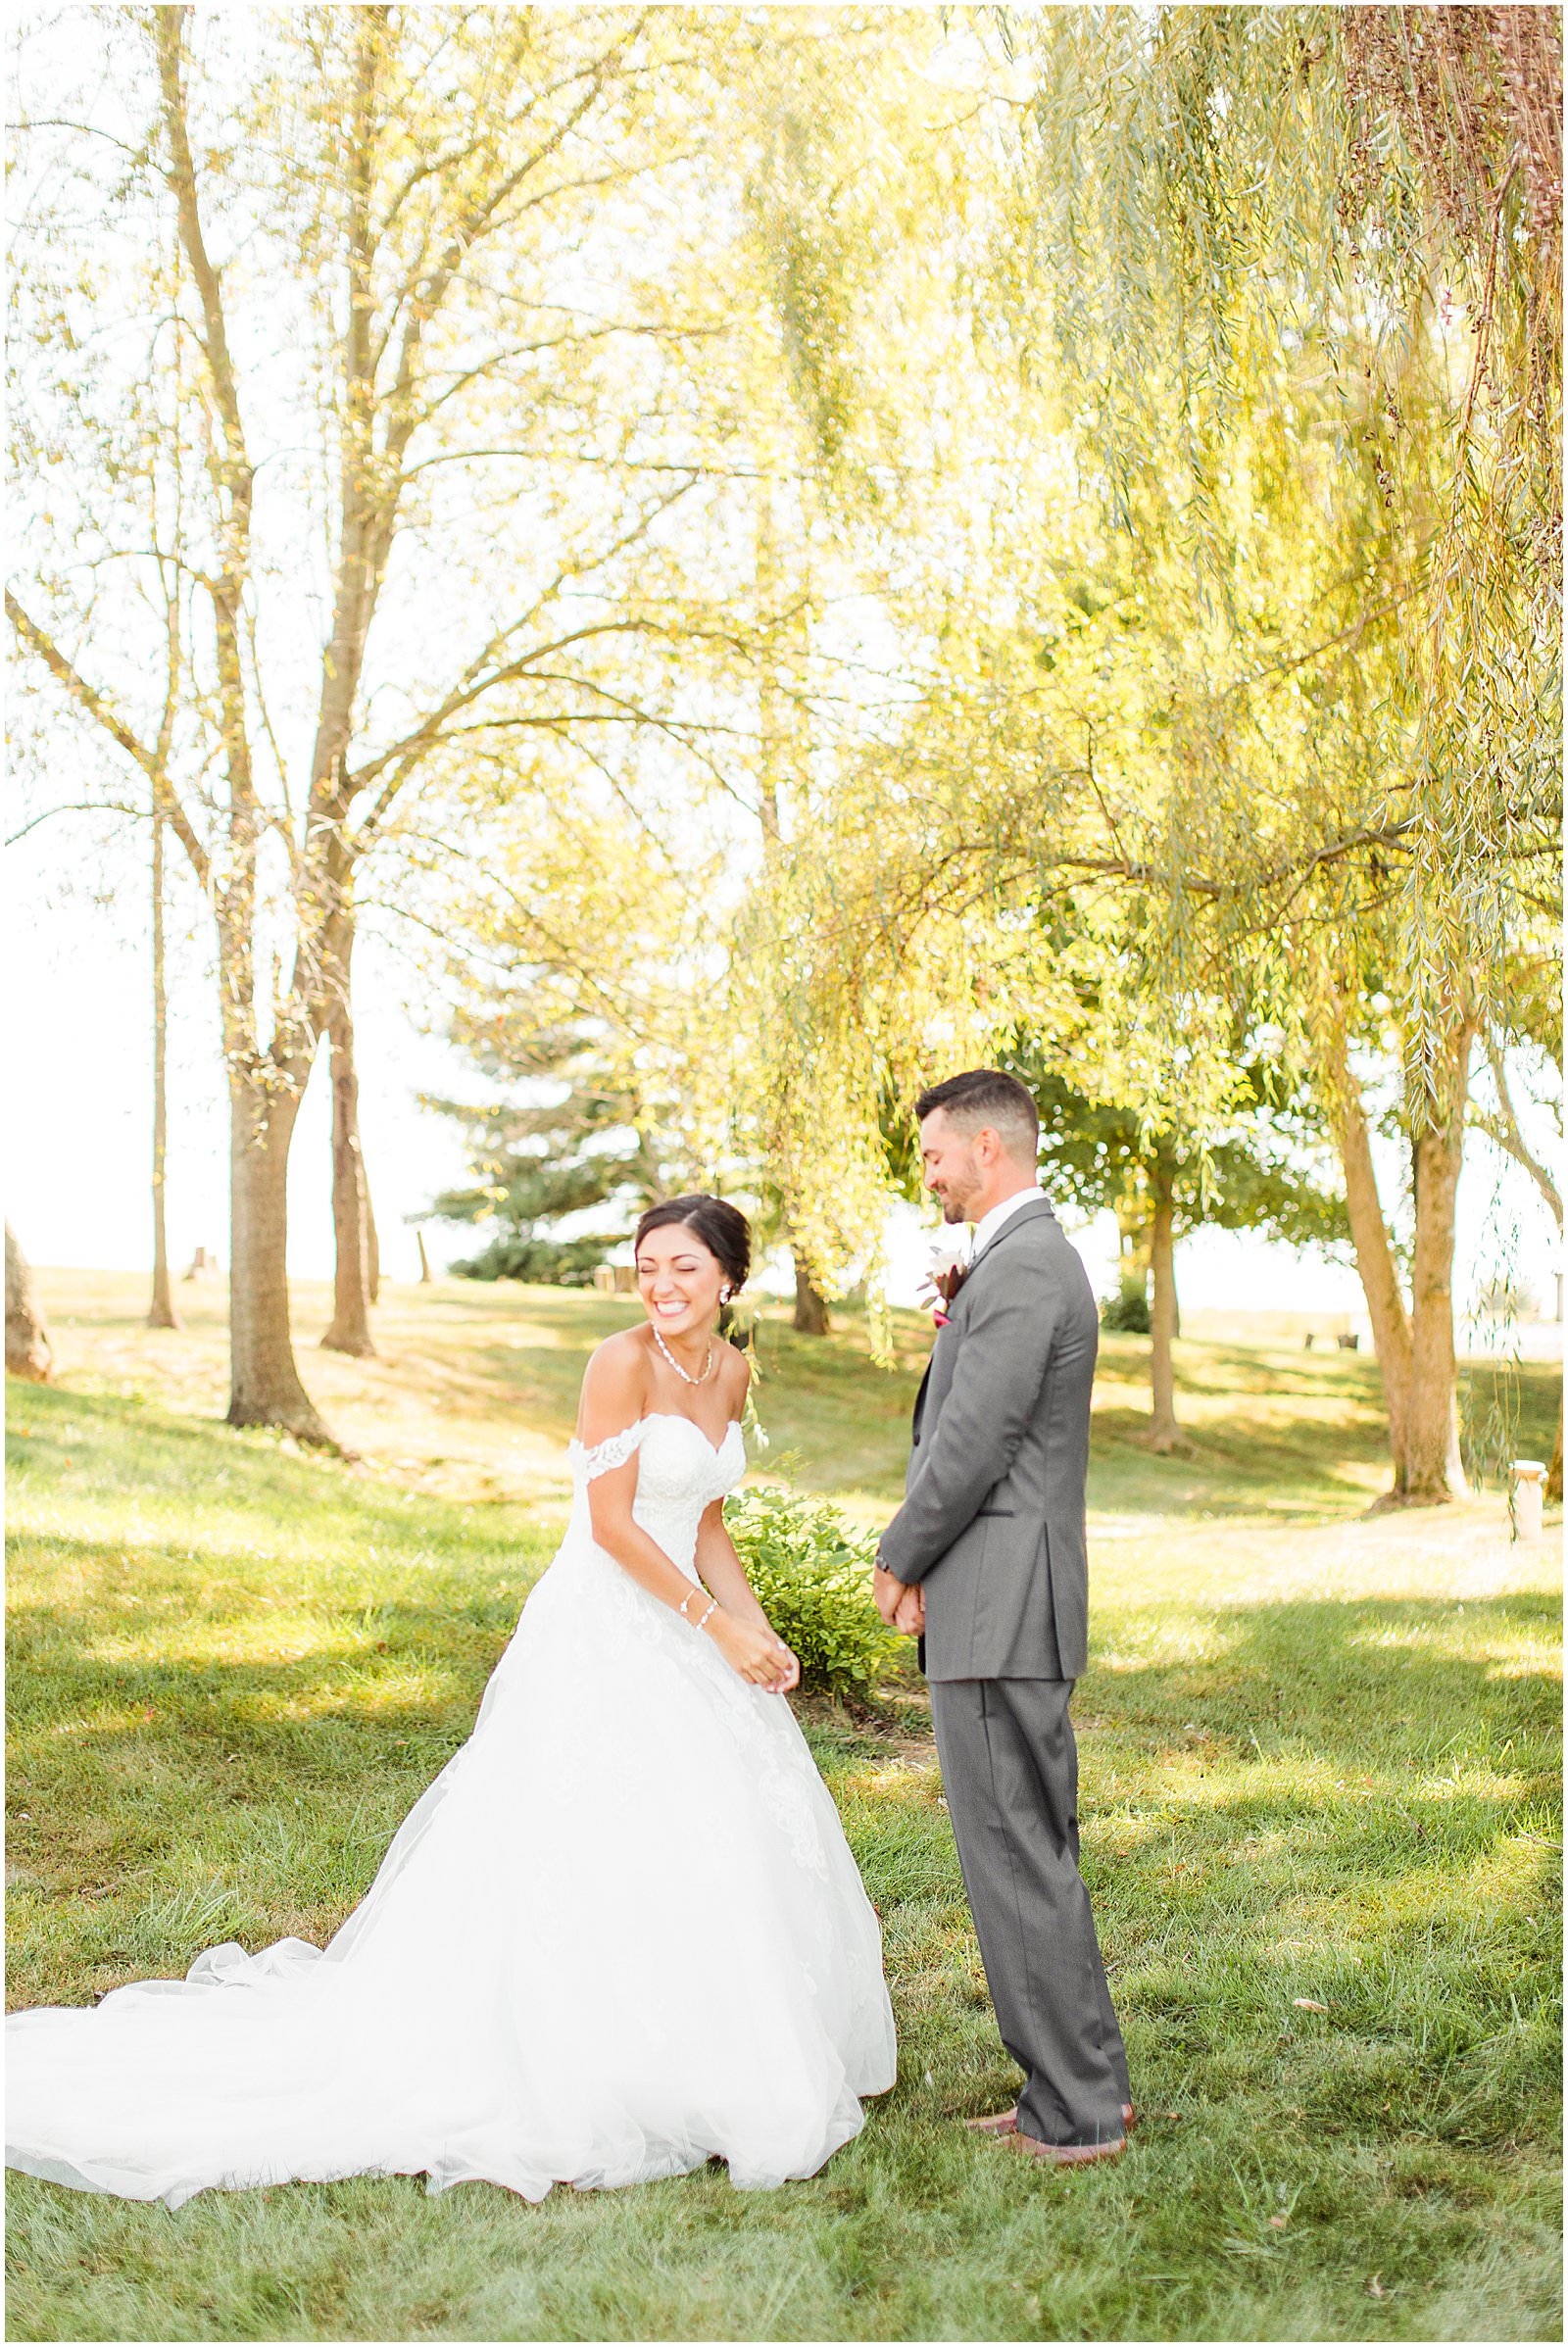 A Stunning Fall Wedding in Indianapolis, IN |. Sally and Andrew | Bret and Brandie Photography 0050.jpg